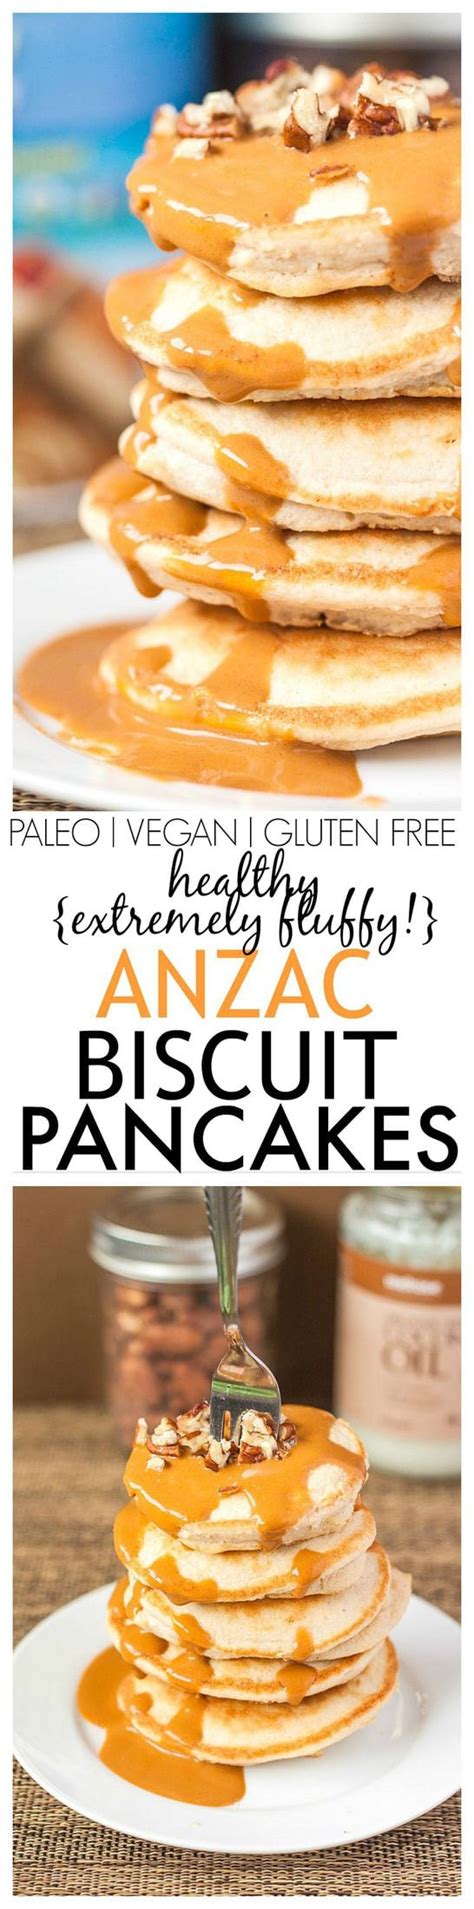 Anzac Biscuit Pancakes